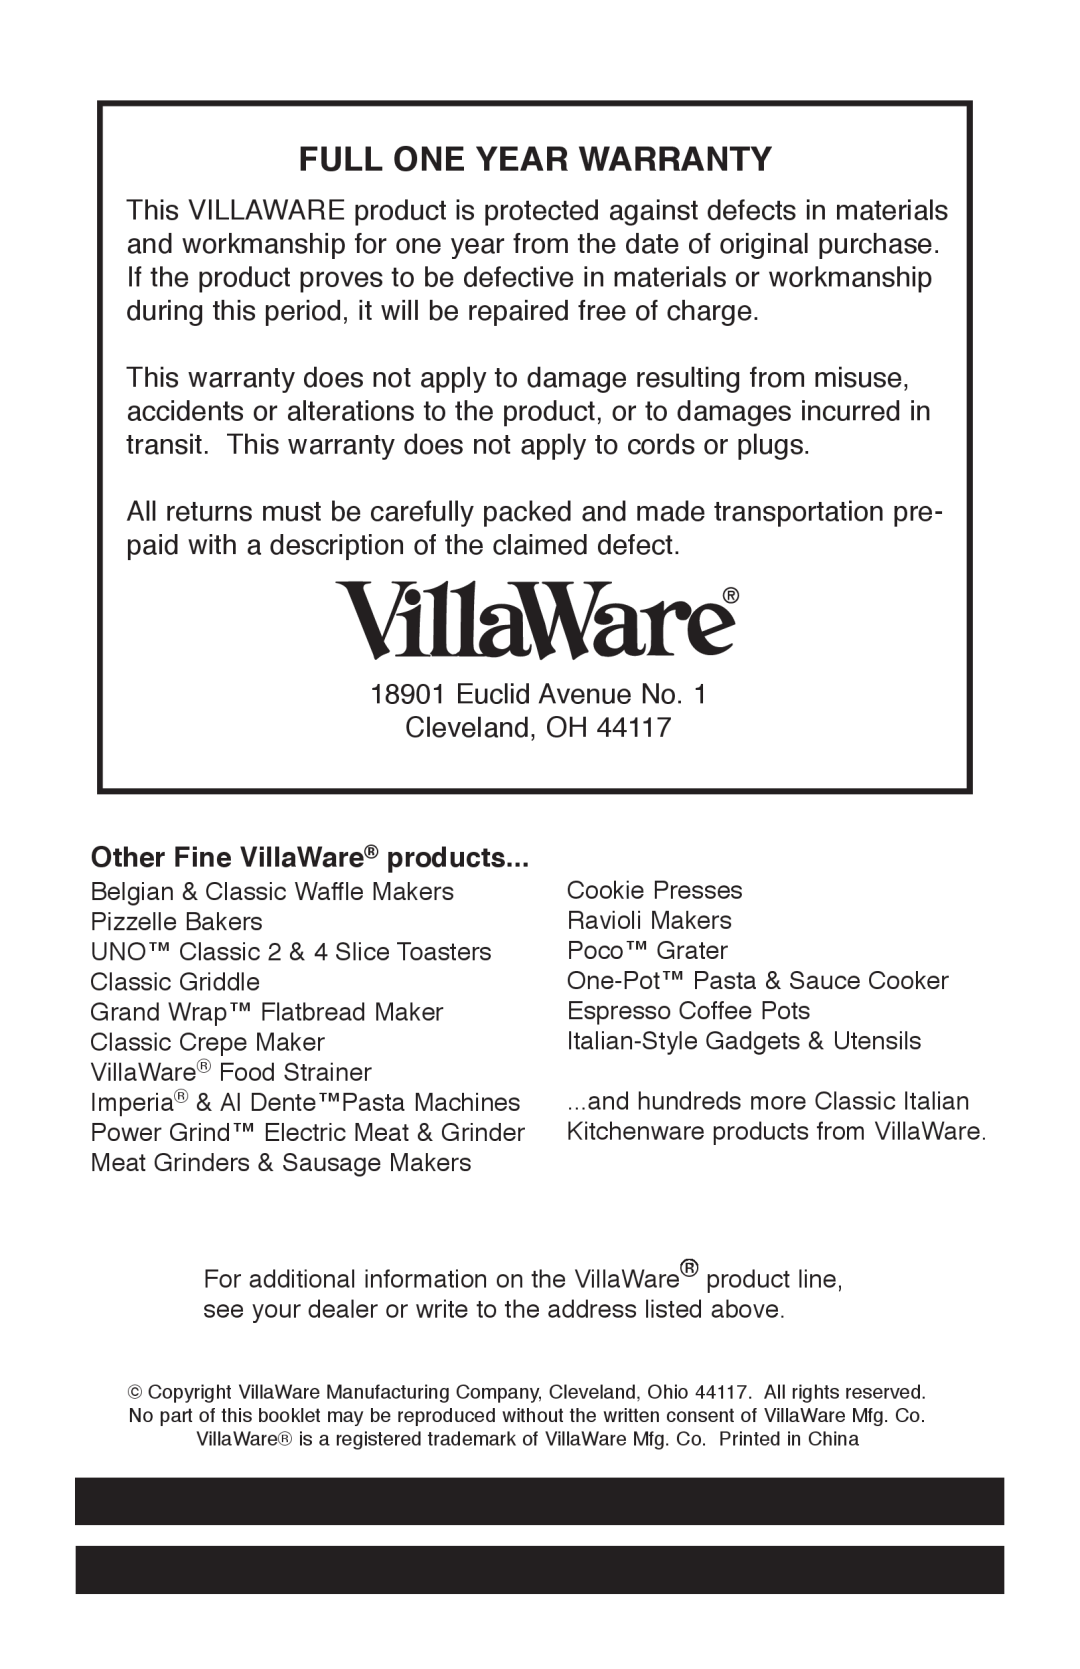 Villaware 5230 manual Full One Year Warranty, Other Fine VillaWare products 